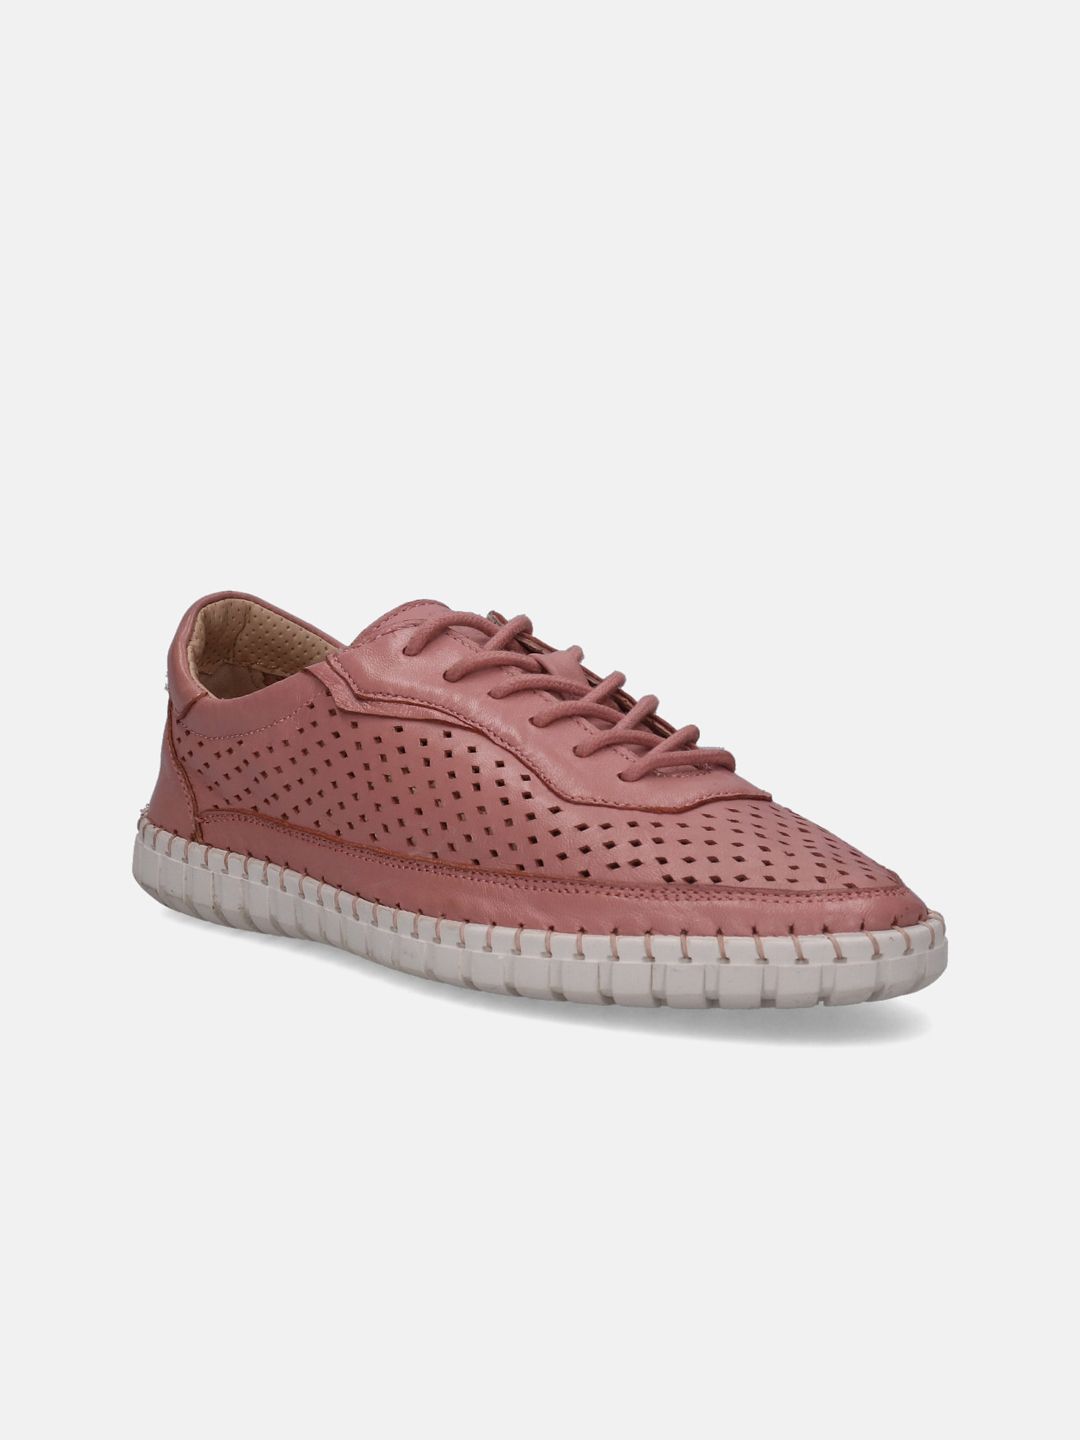 BAGATT Women Pink Woven Design Leather Sneakers Price in India